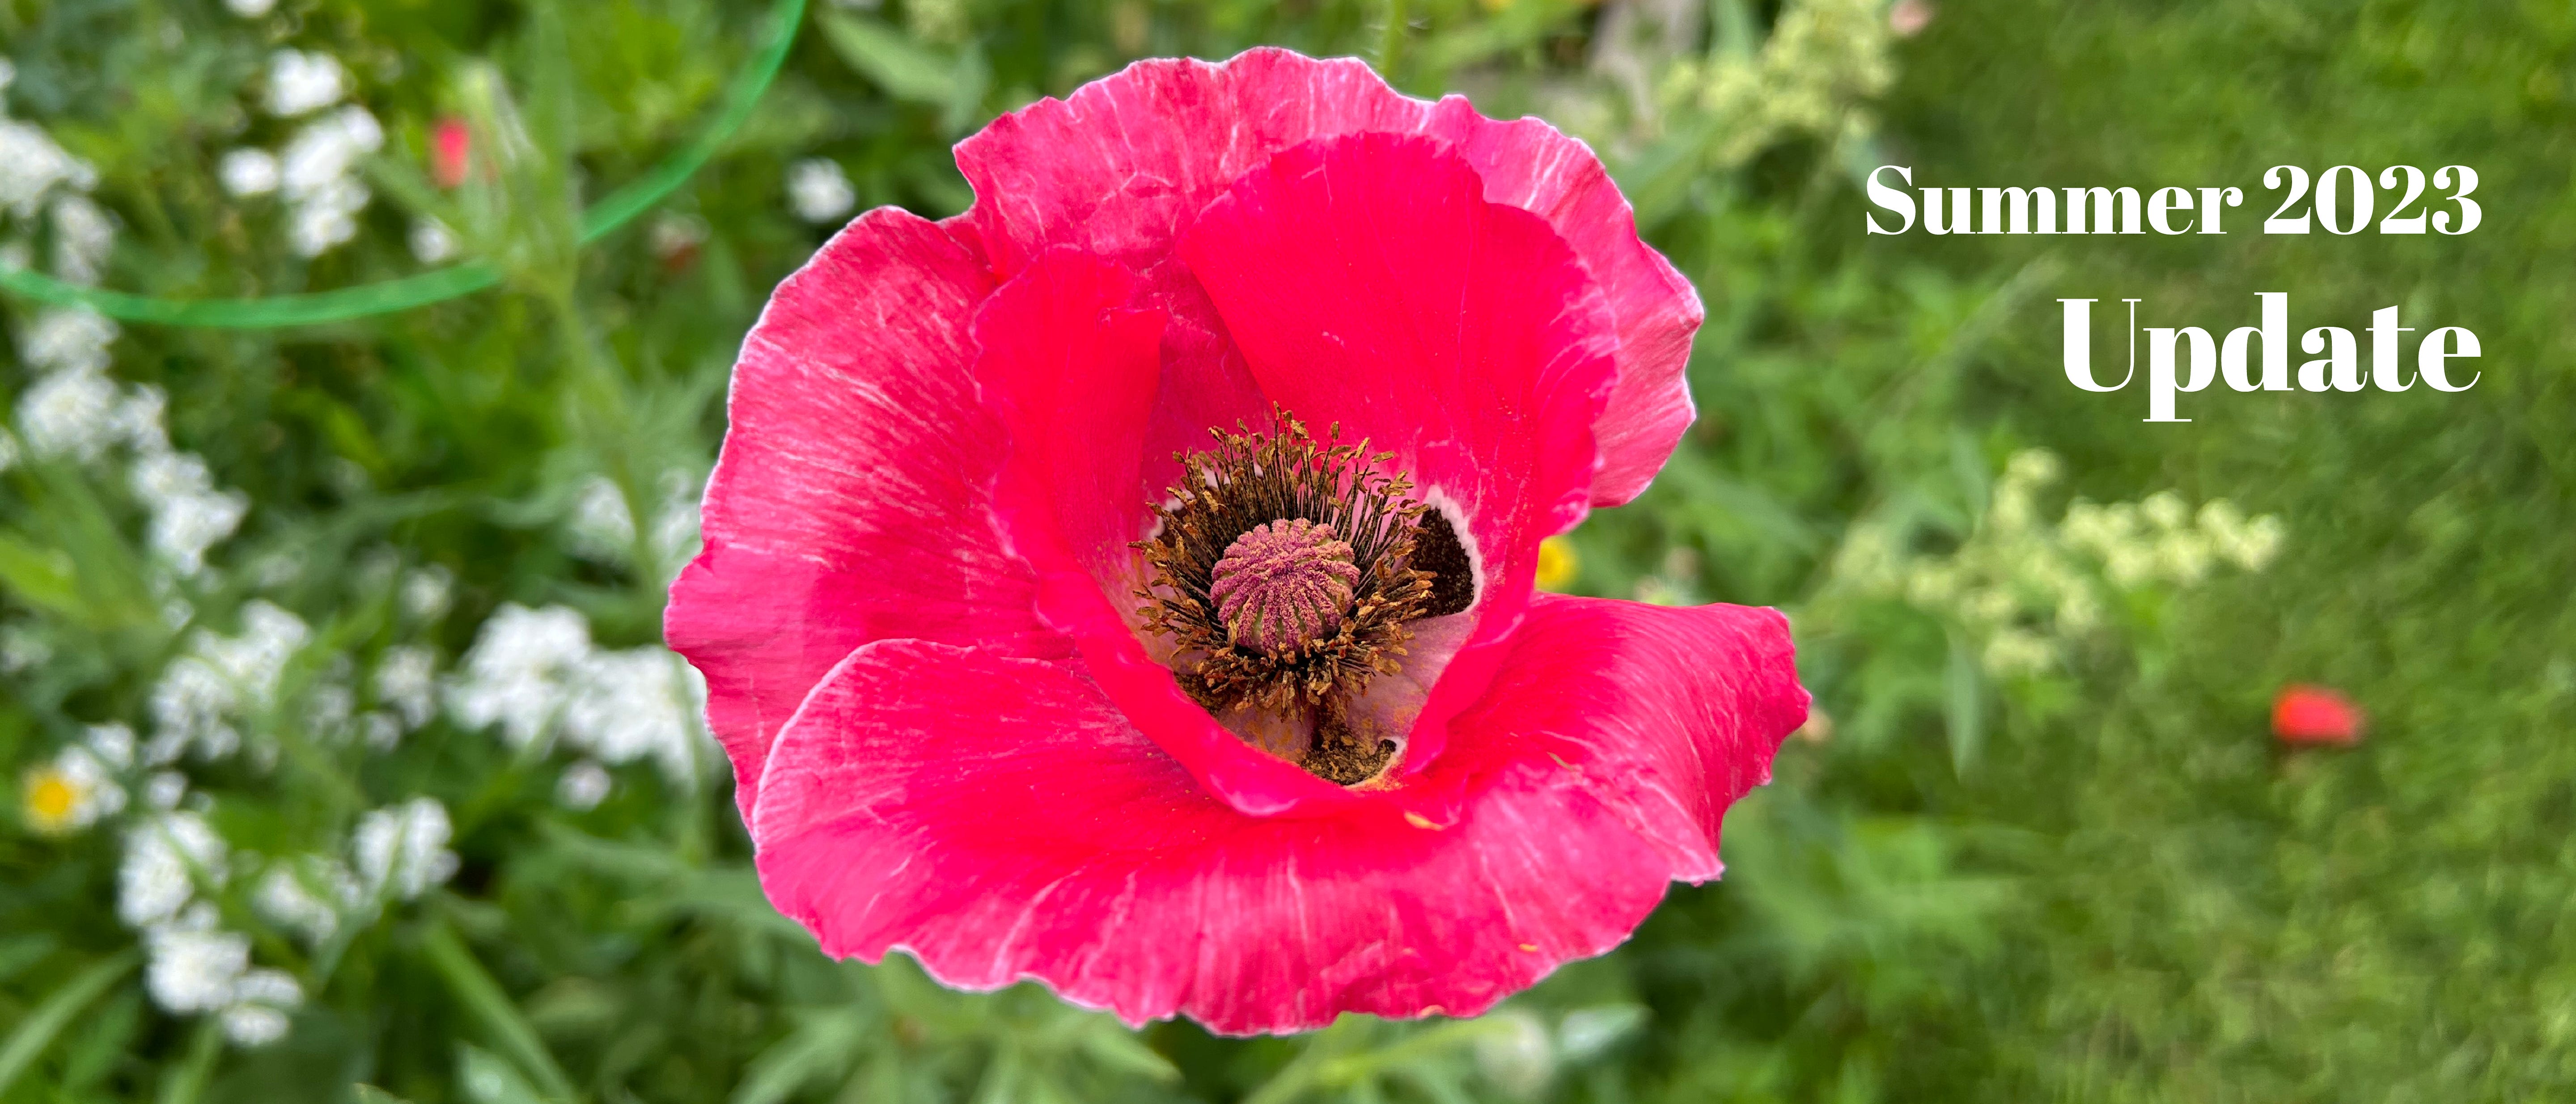 Close up photo of a vibrant magenta poppy against a blurry lush green garden. Text in the left hand upper corner reads: Summer 2023 update